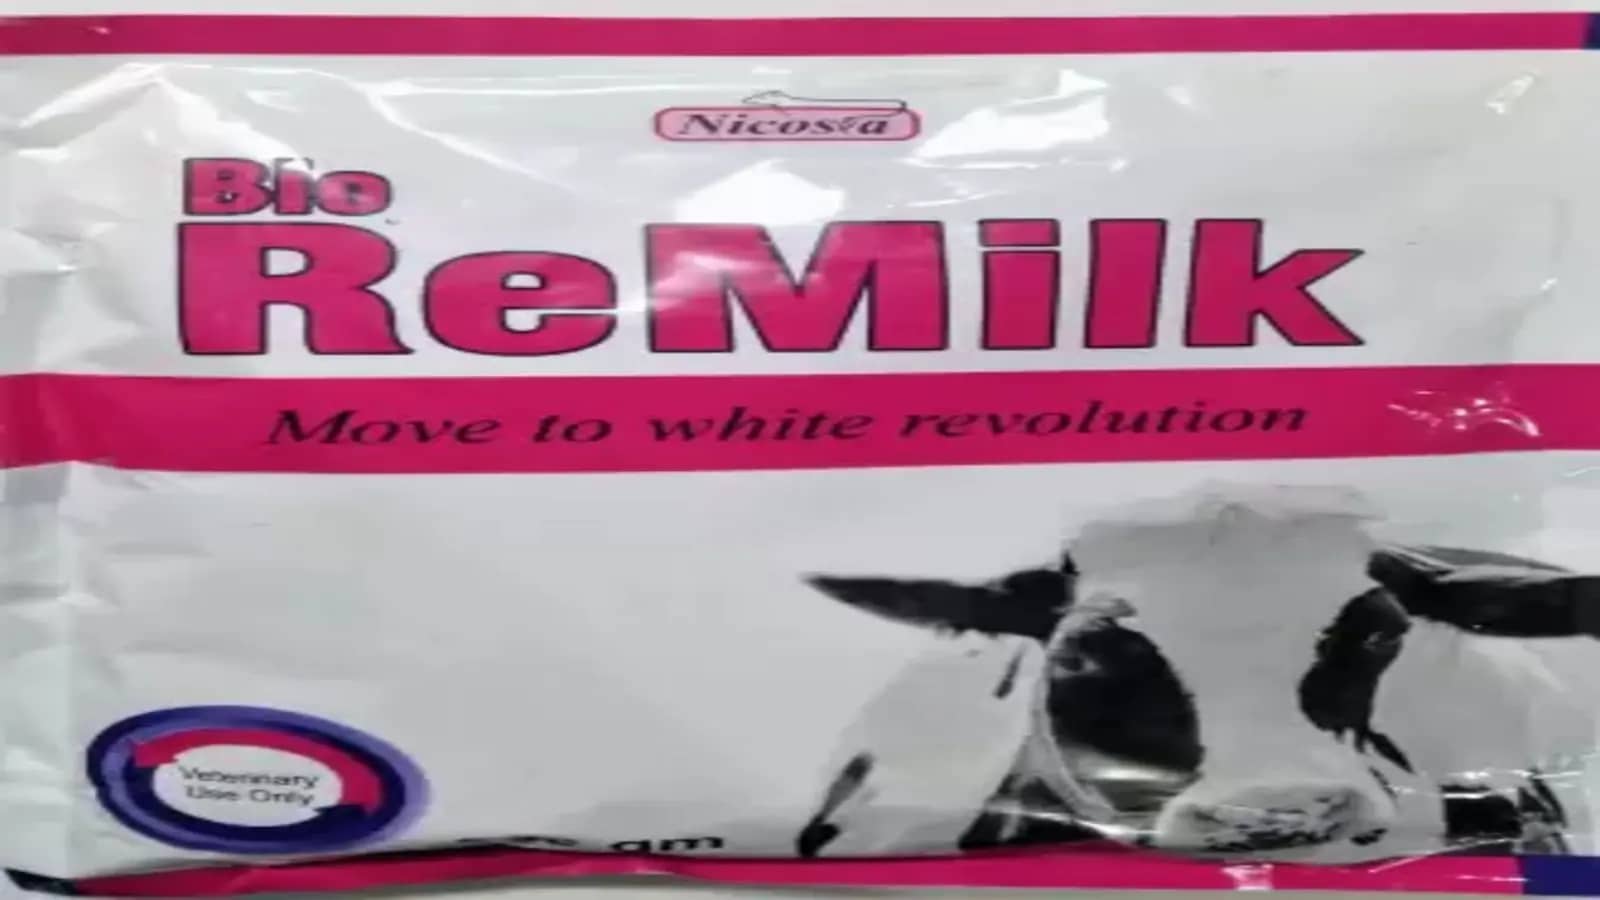 Remilk plans to invest in Precision Fermented Milk Production Facility in Denmark